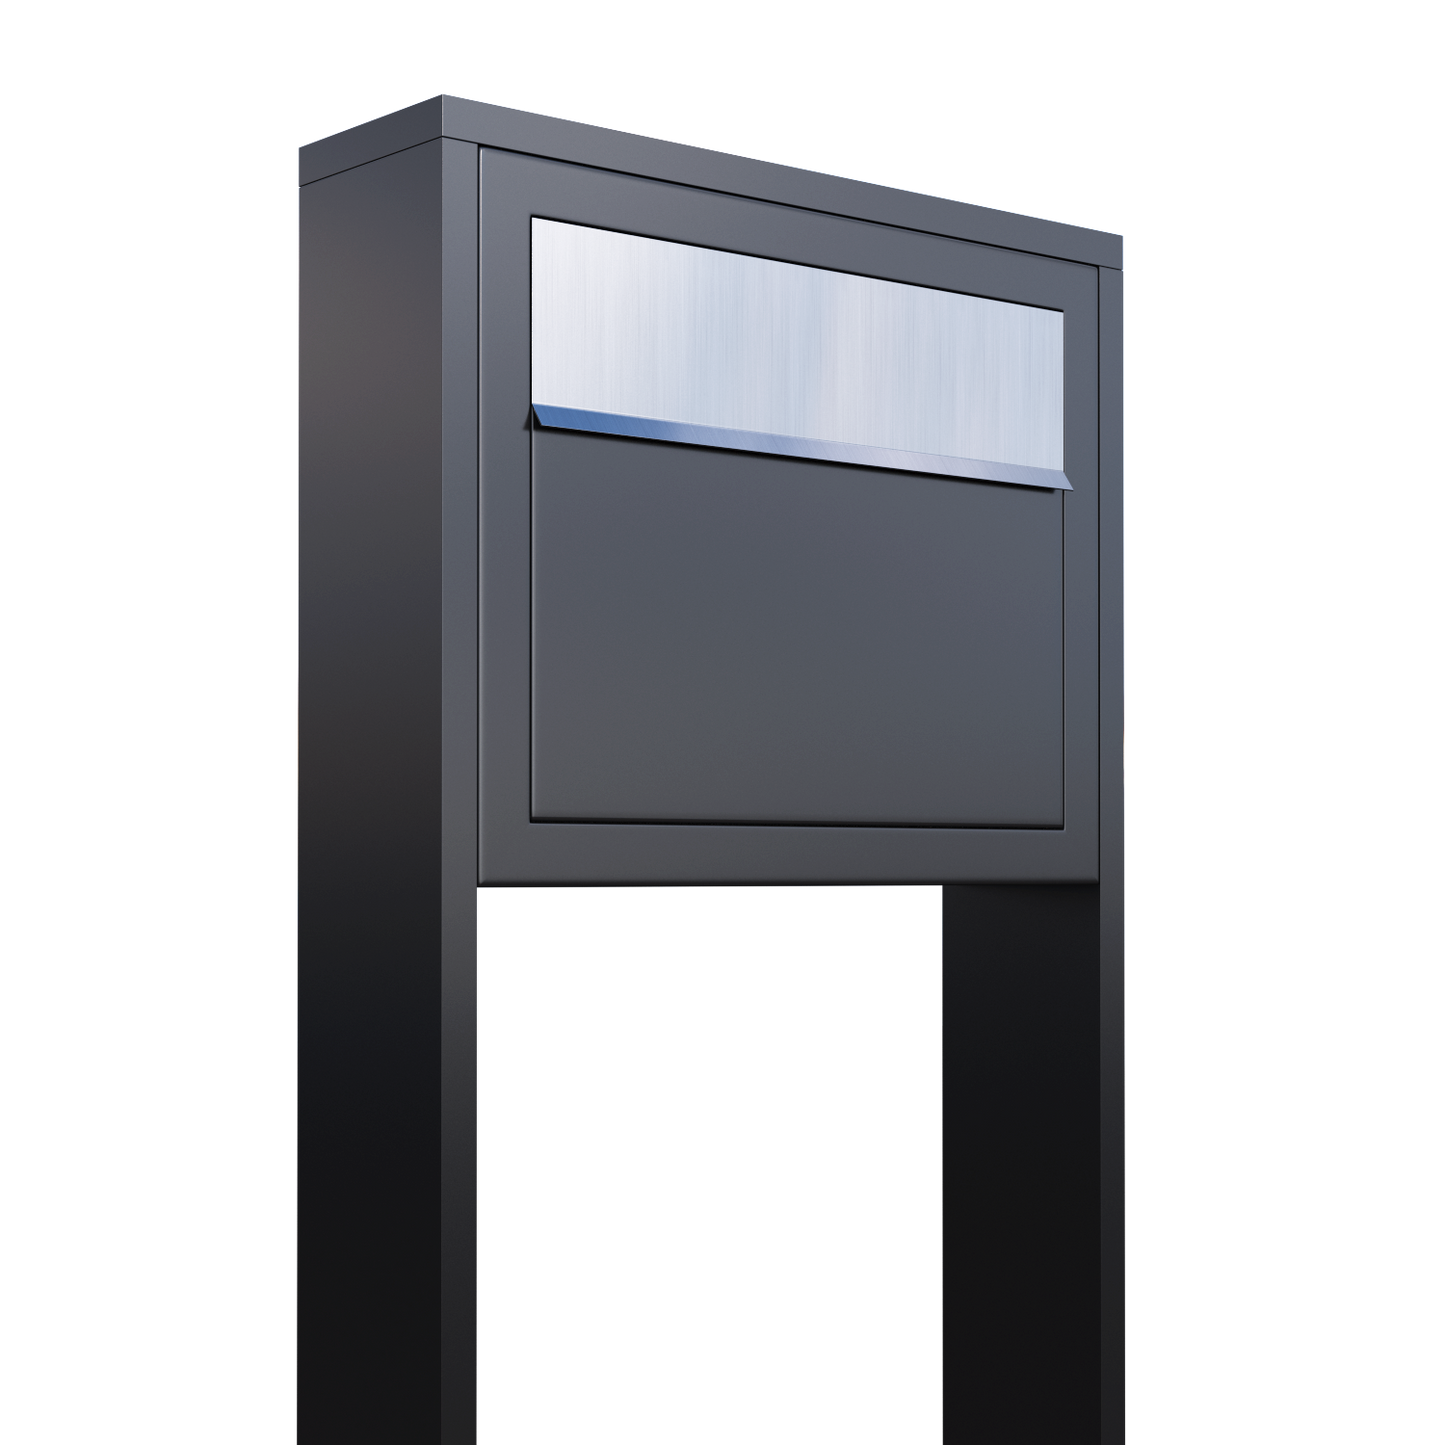 STAND ELEGANCE by Bravios - Modern post-mounted anthracite mailbox with stainless steel flap